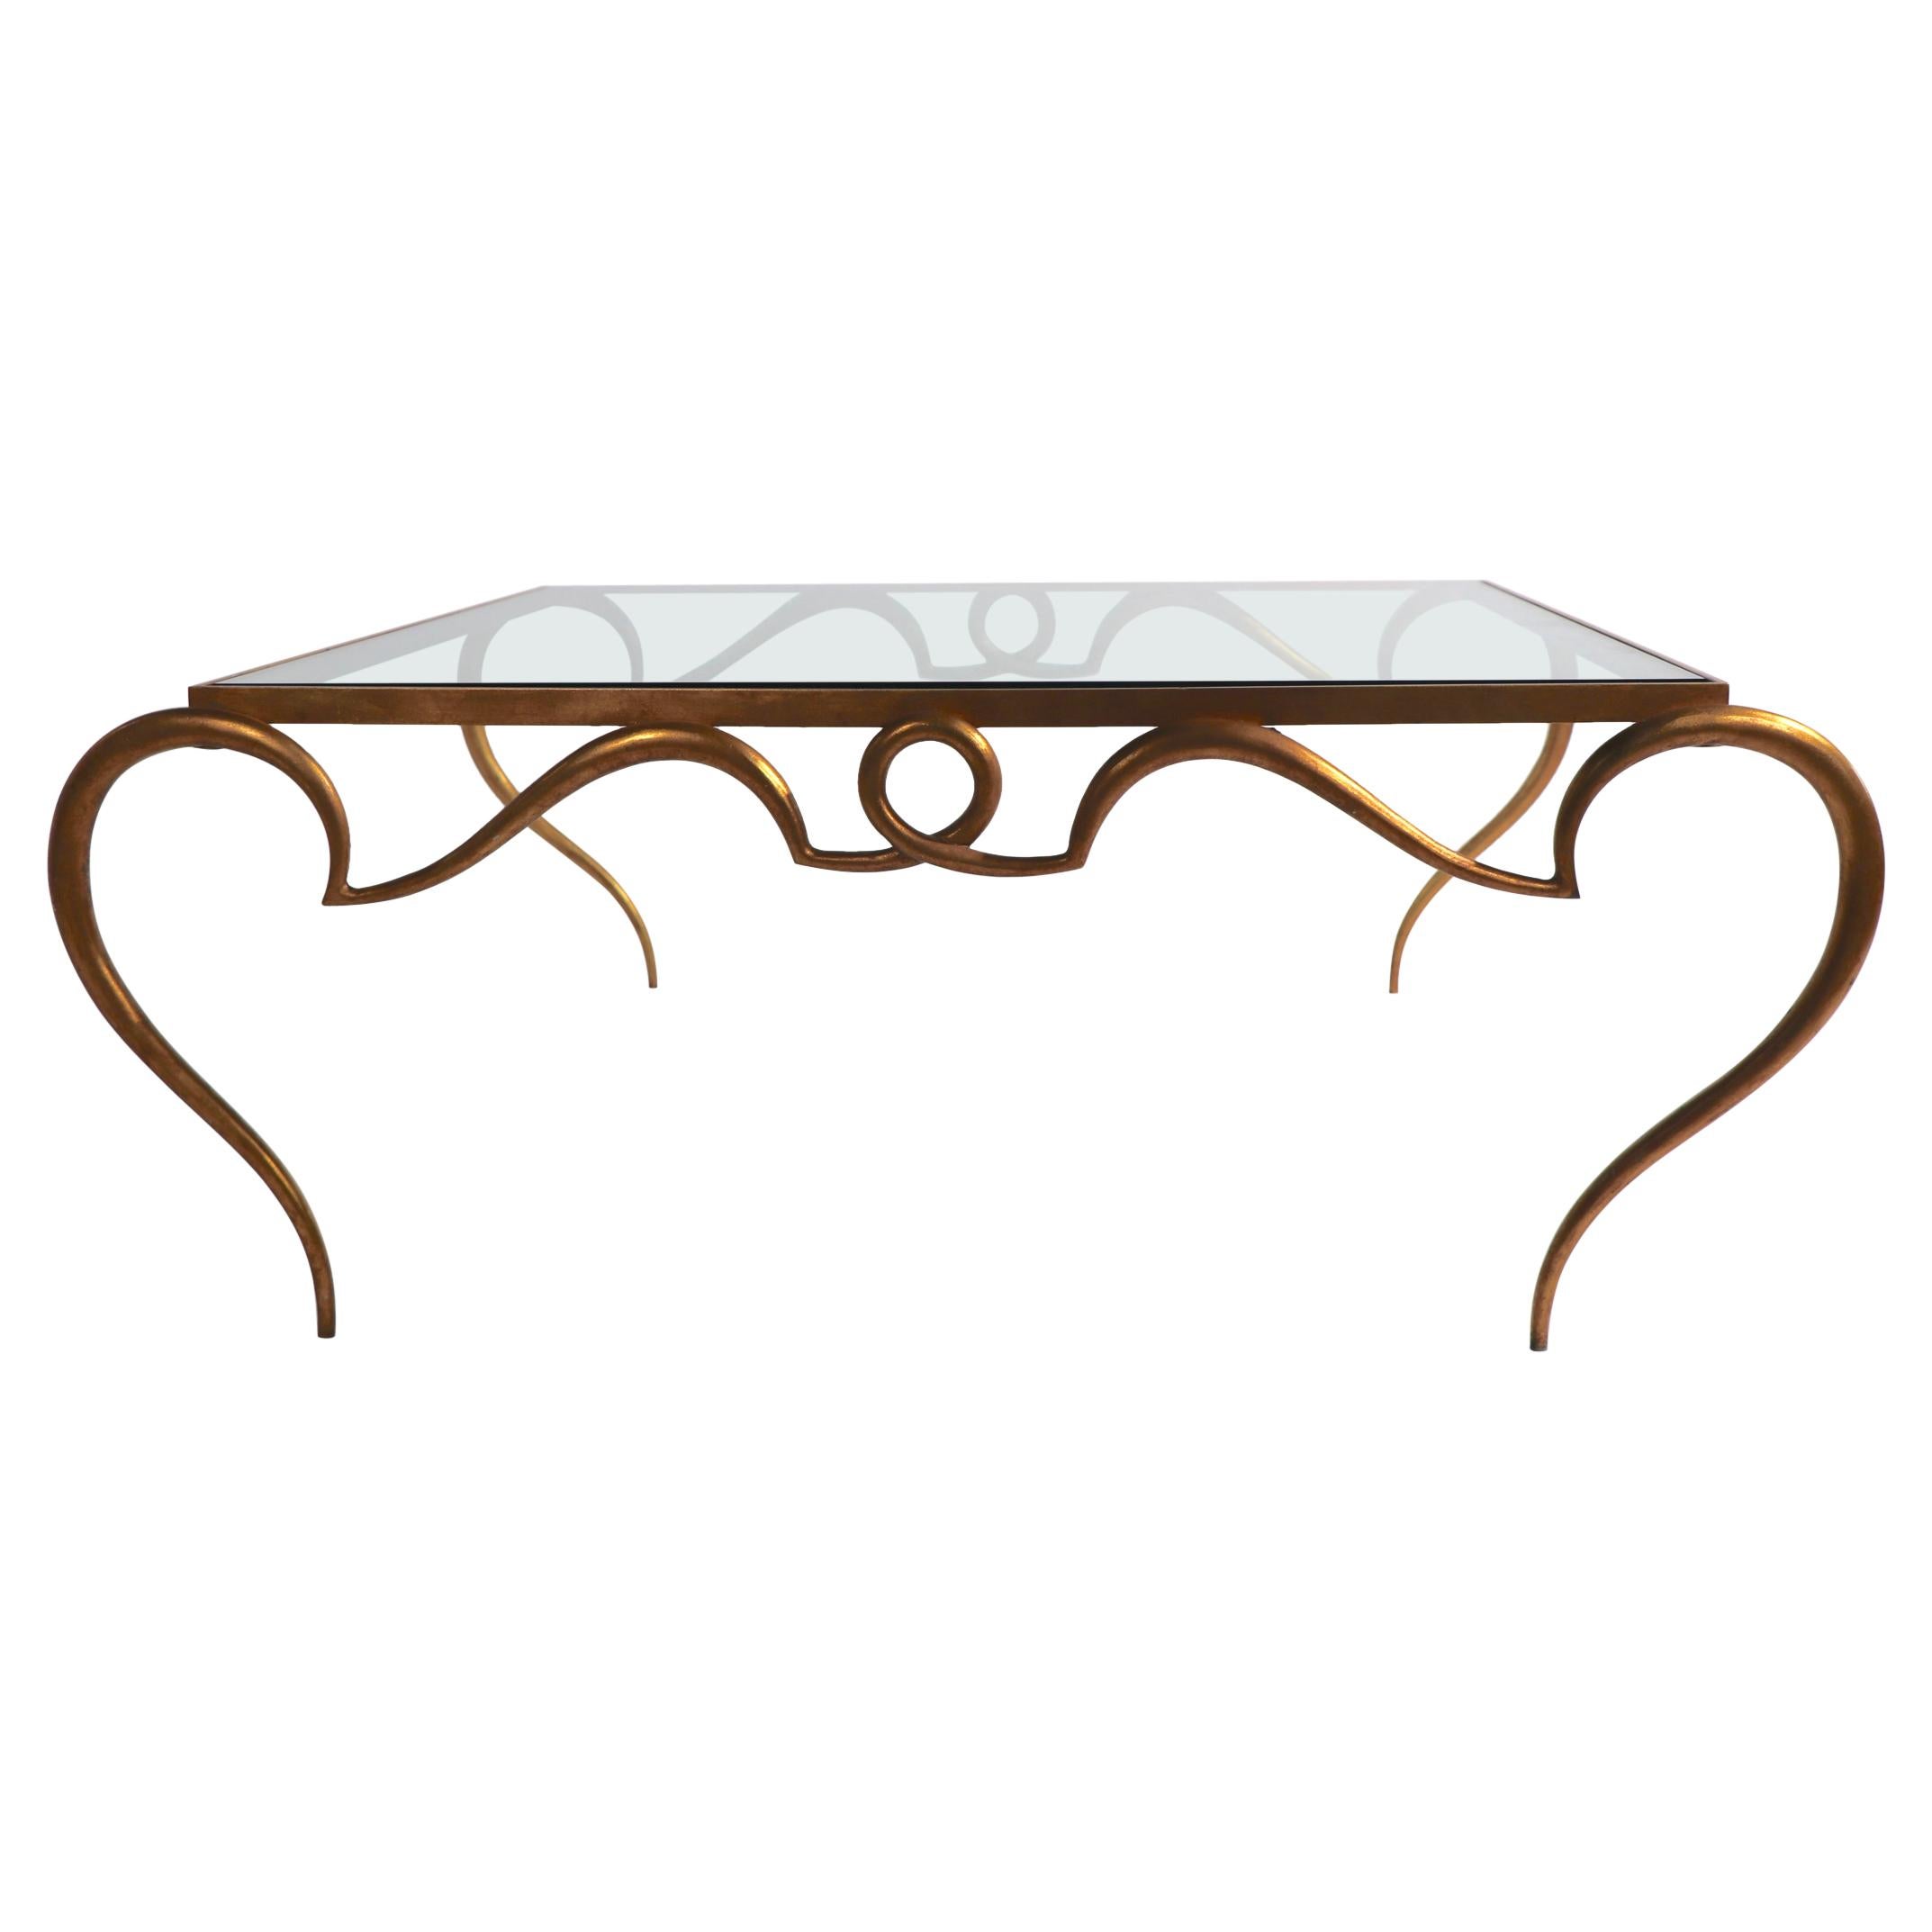 Faux Gilt Metal Scrollwork and Glass Coffee Table att. to Rene Drouet For Sale